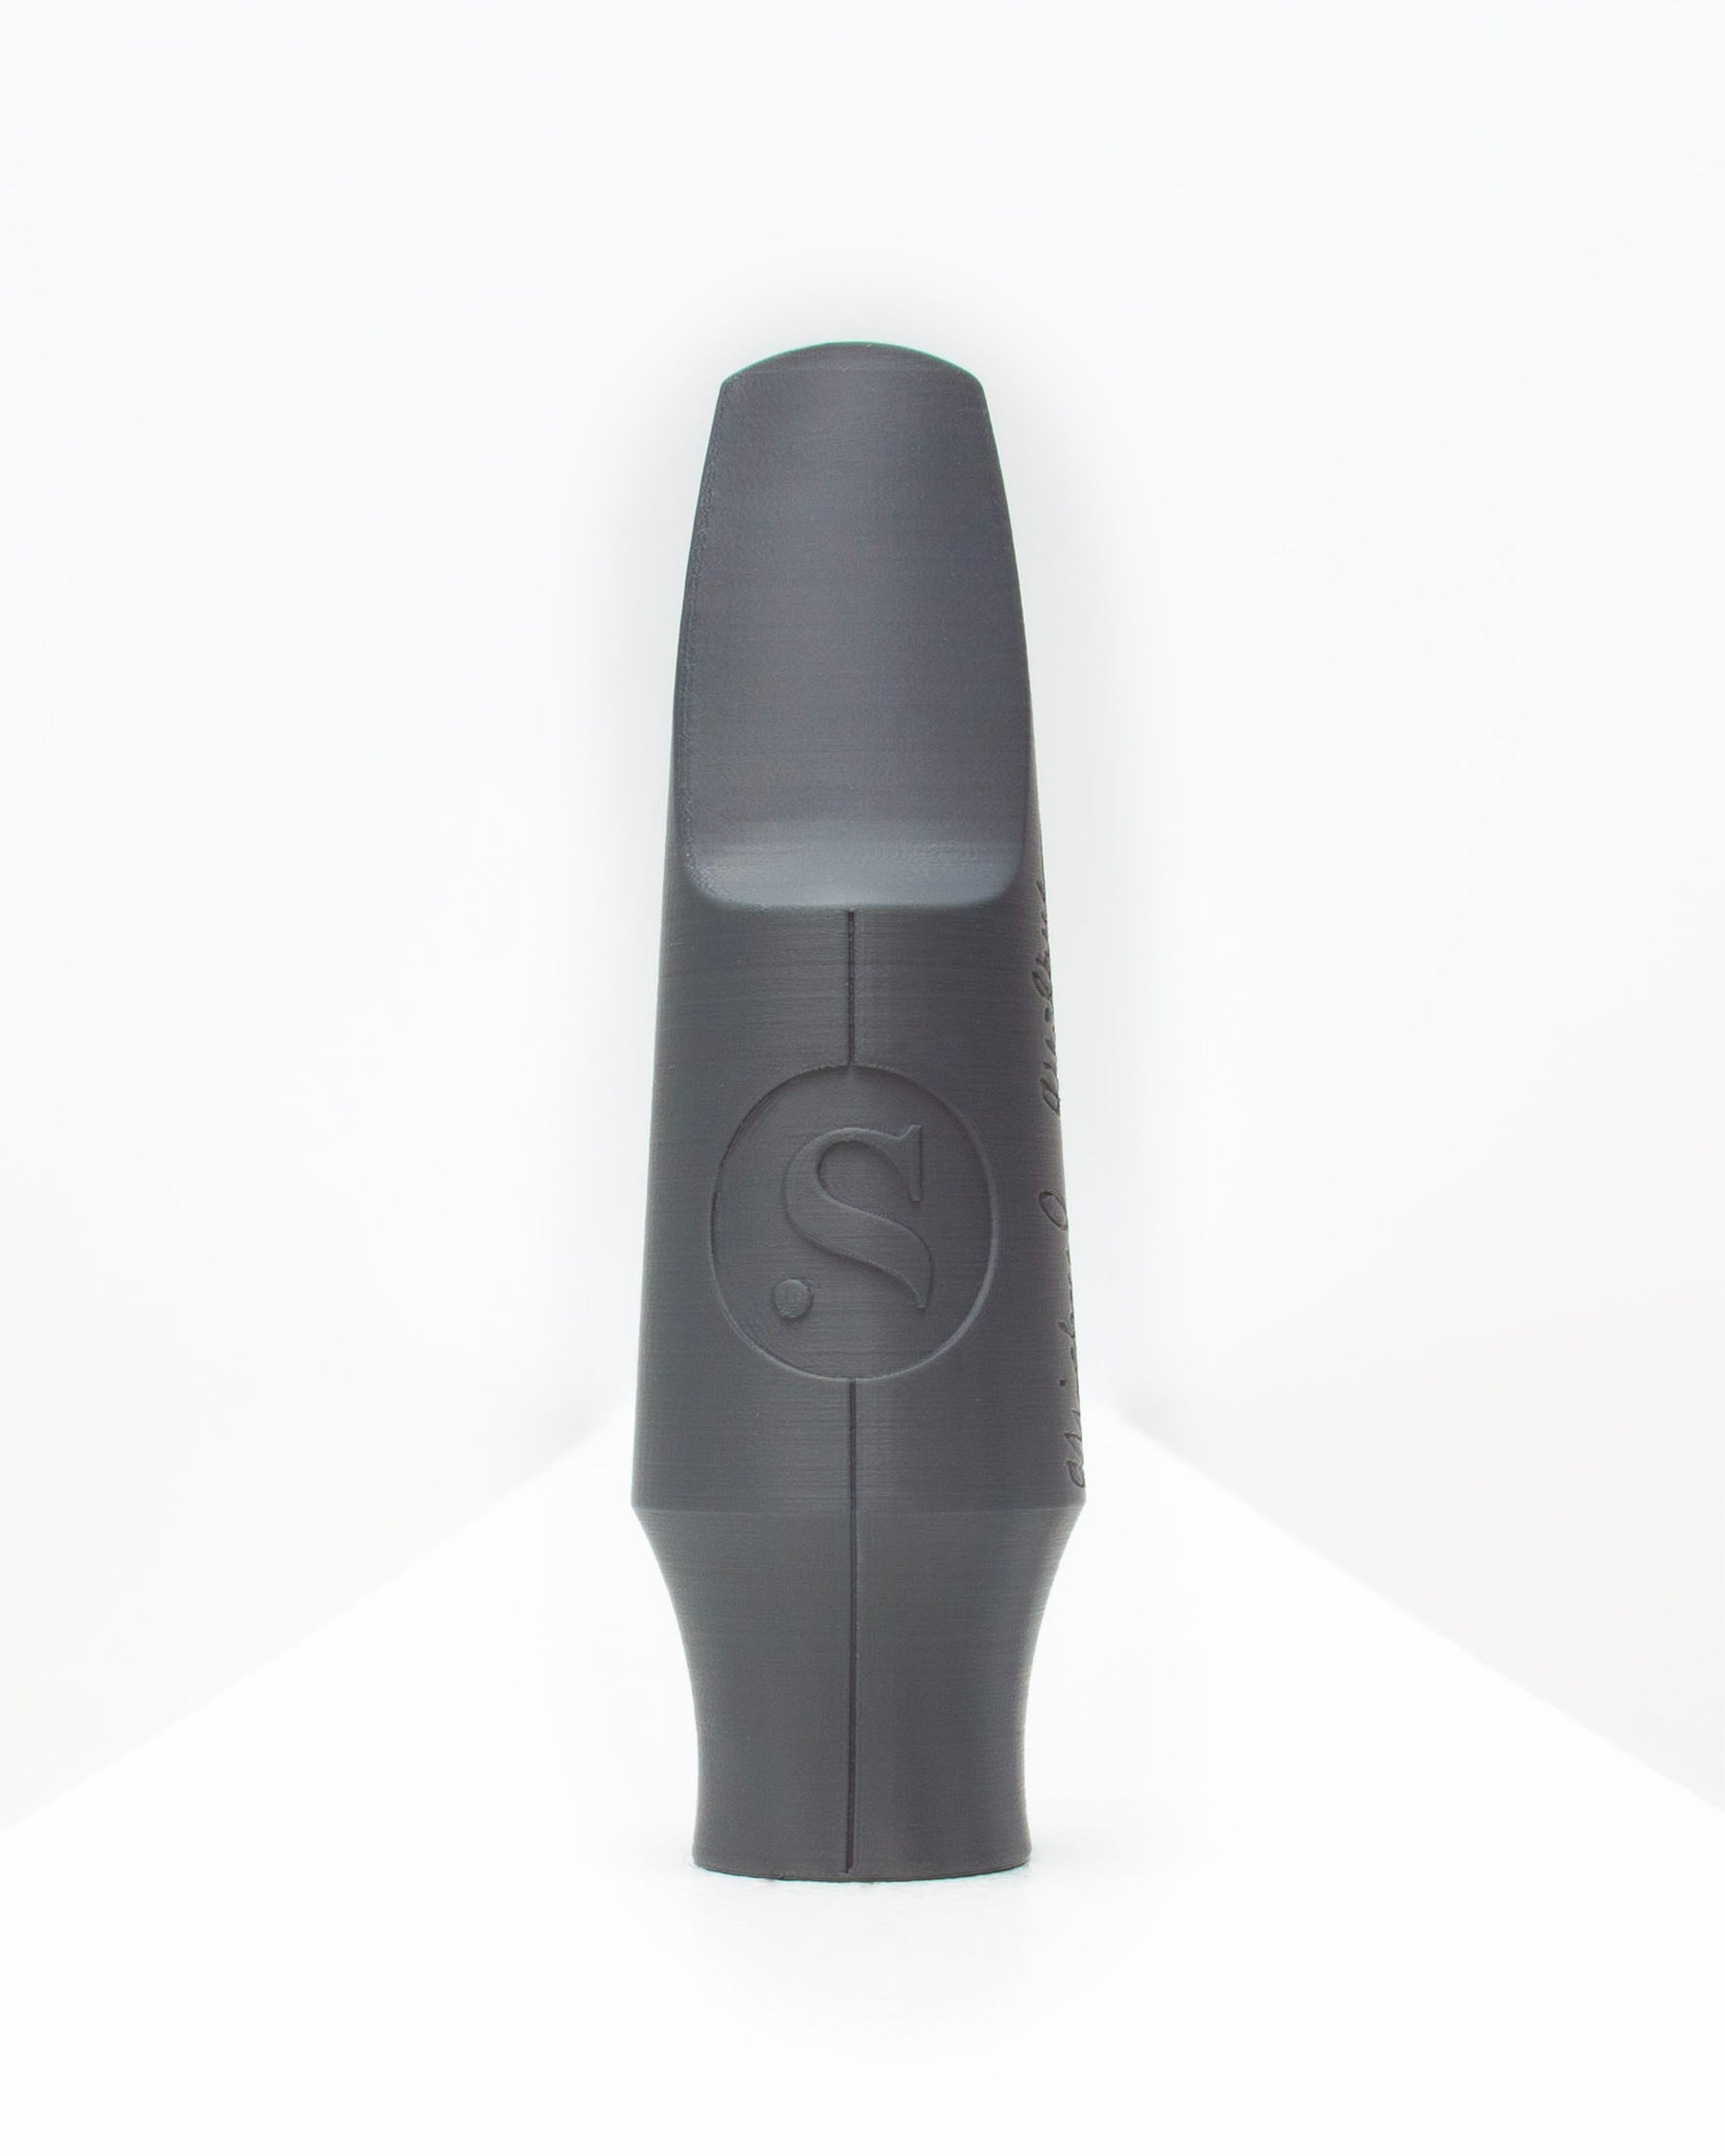 Tenor Originals Saxophone mouthpiece - Spark by Syos - 8 / Anthracite Metal